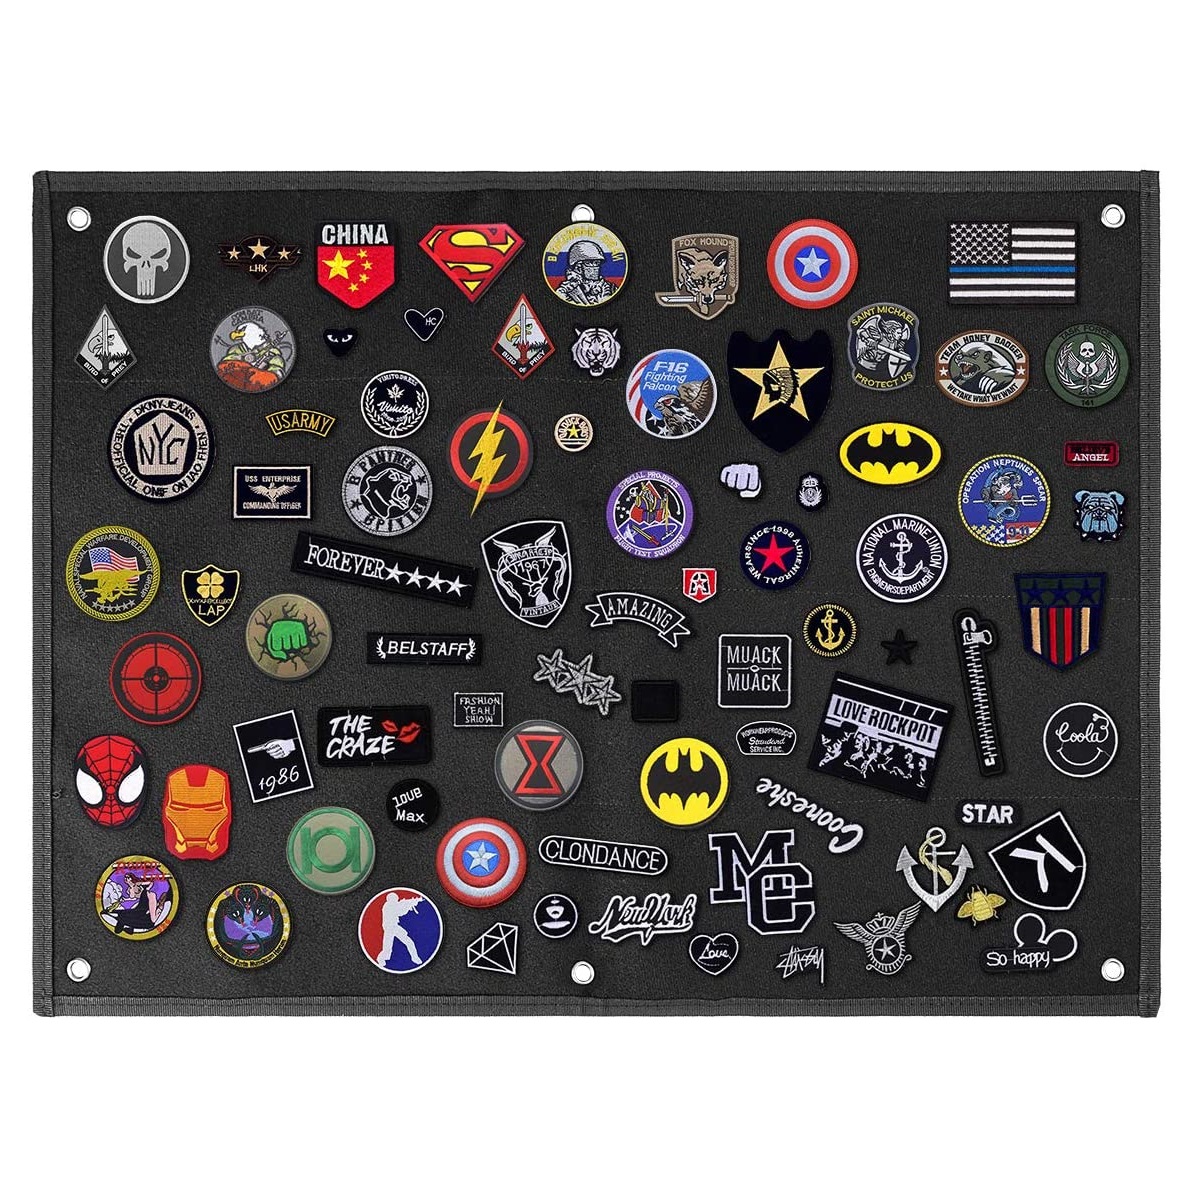 Patch Wall Display Panel for Velcro Patches